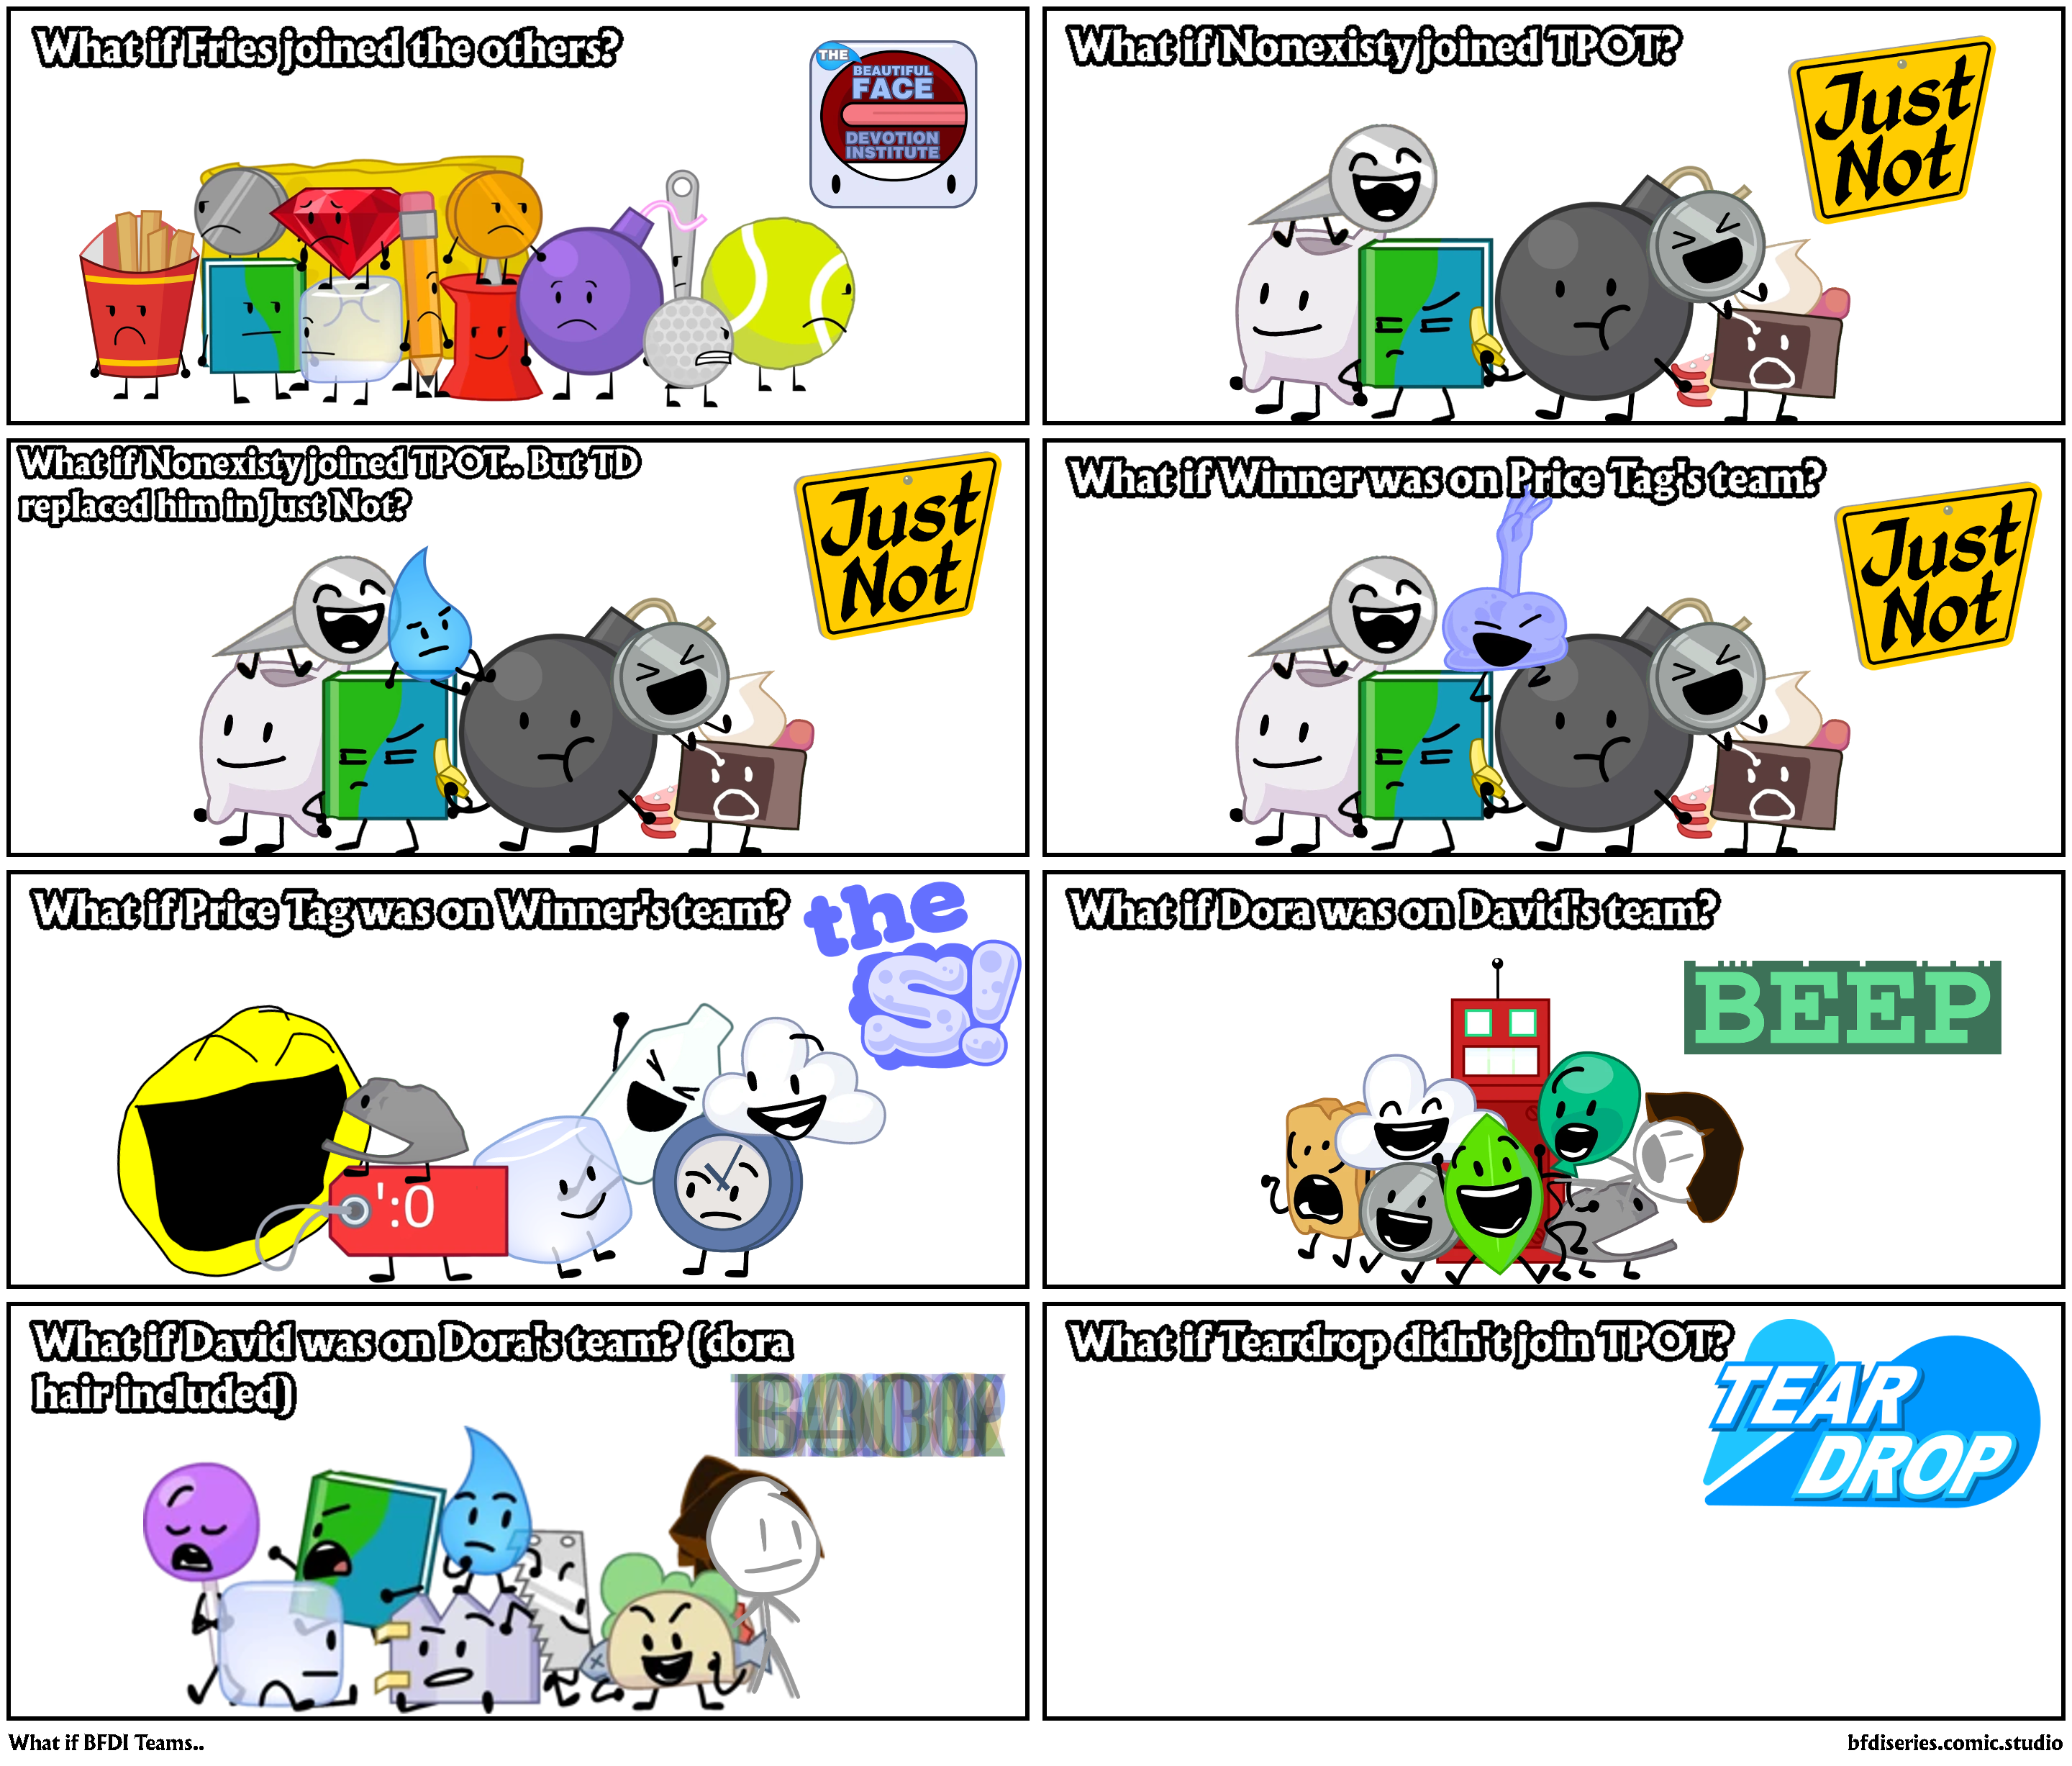 What if BFDI Teams..